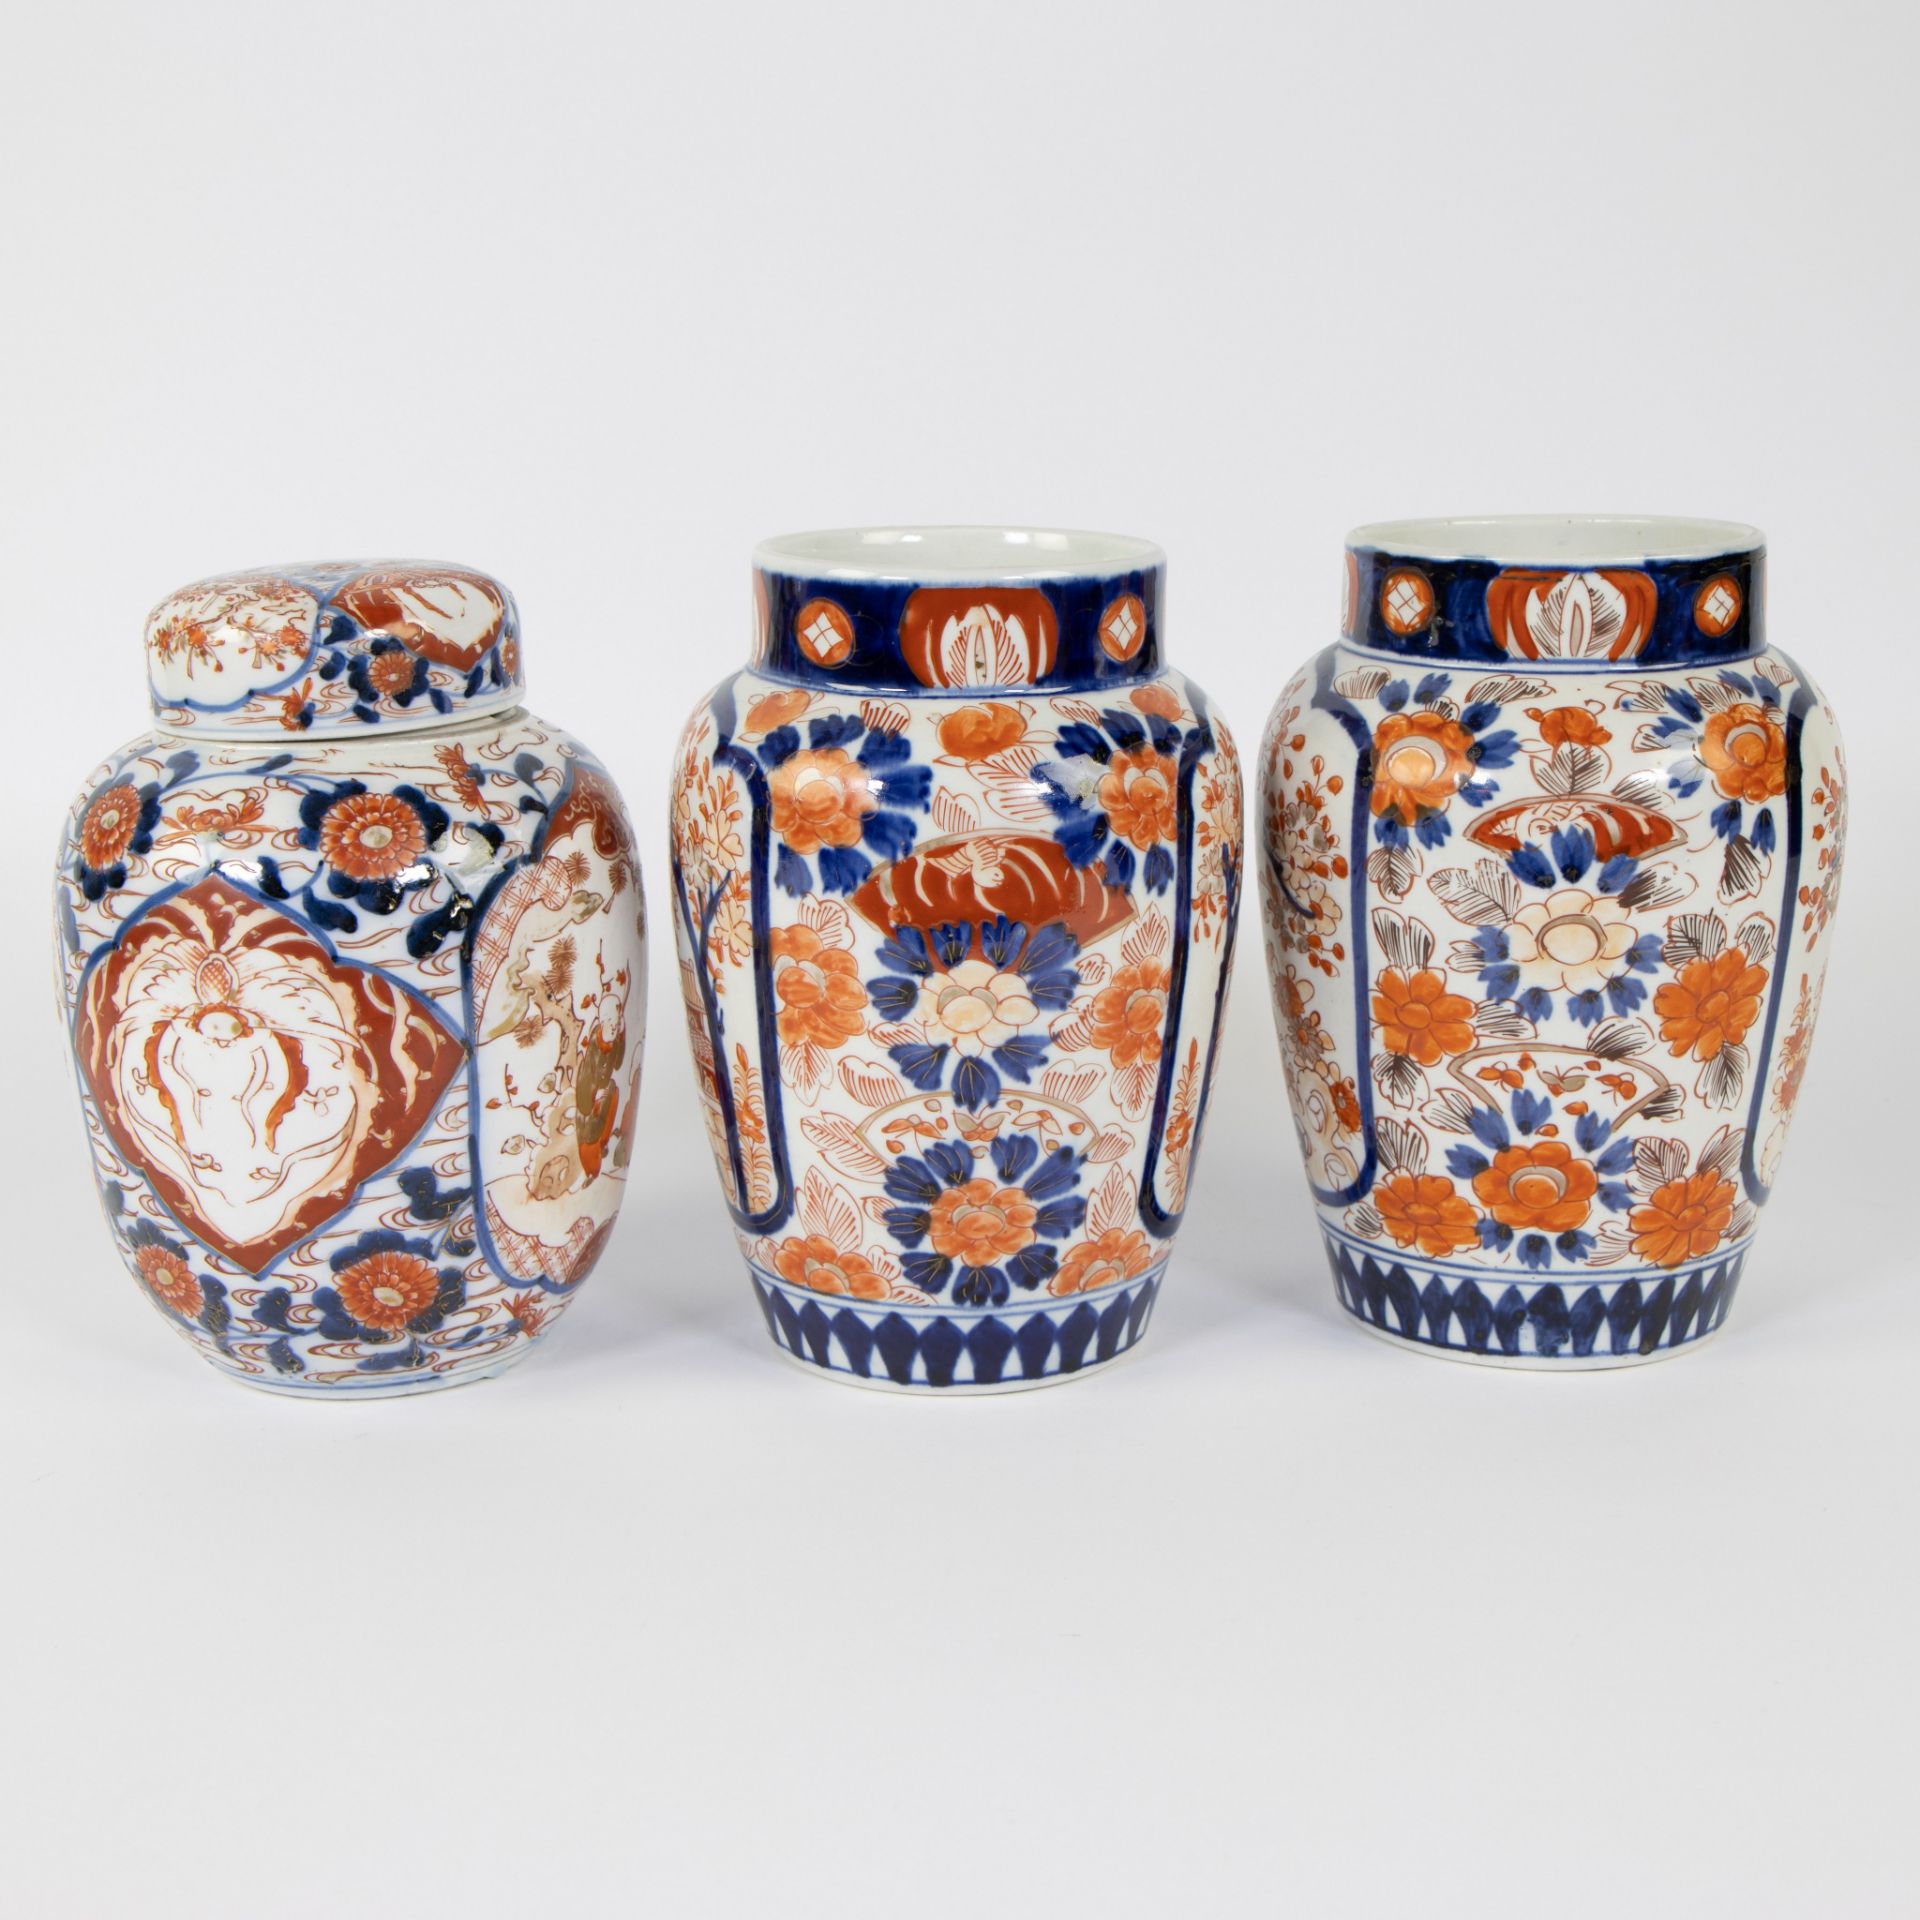 Pair of Japanese Imari lidded vases and one convex lidded vase, 19th century - Image 4 of 6